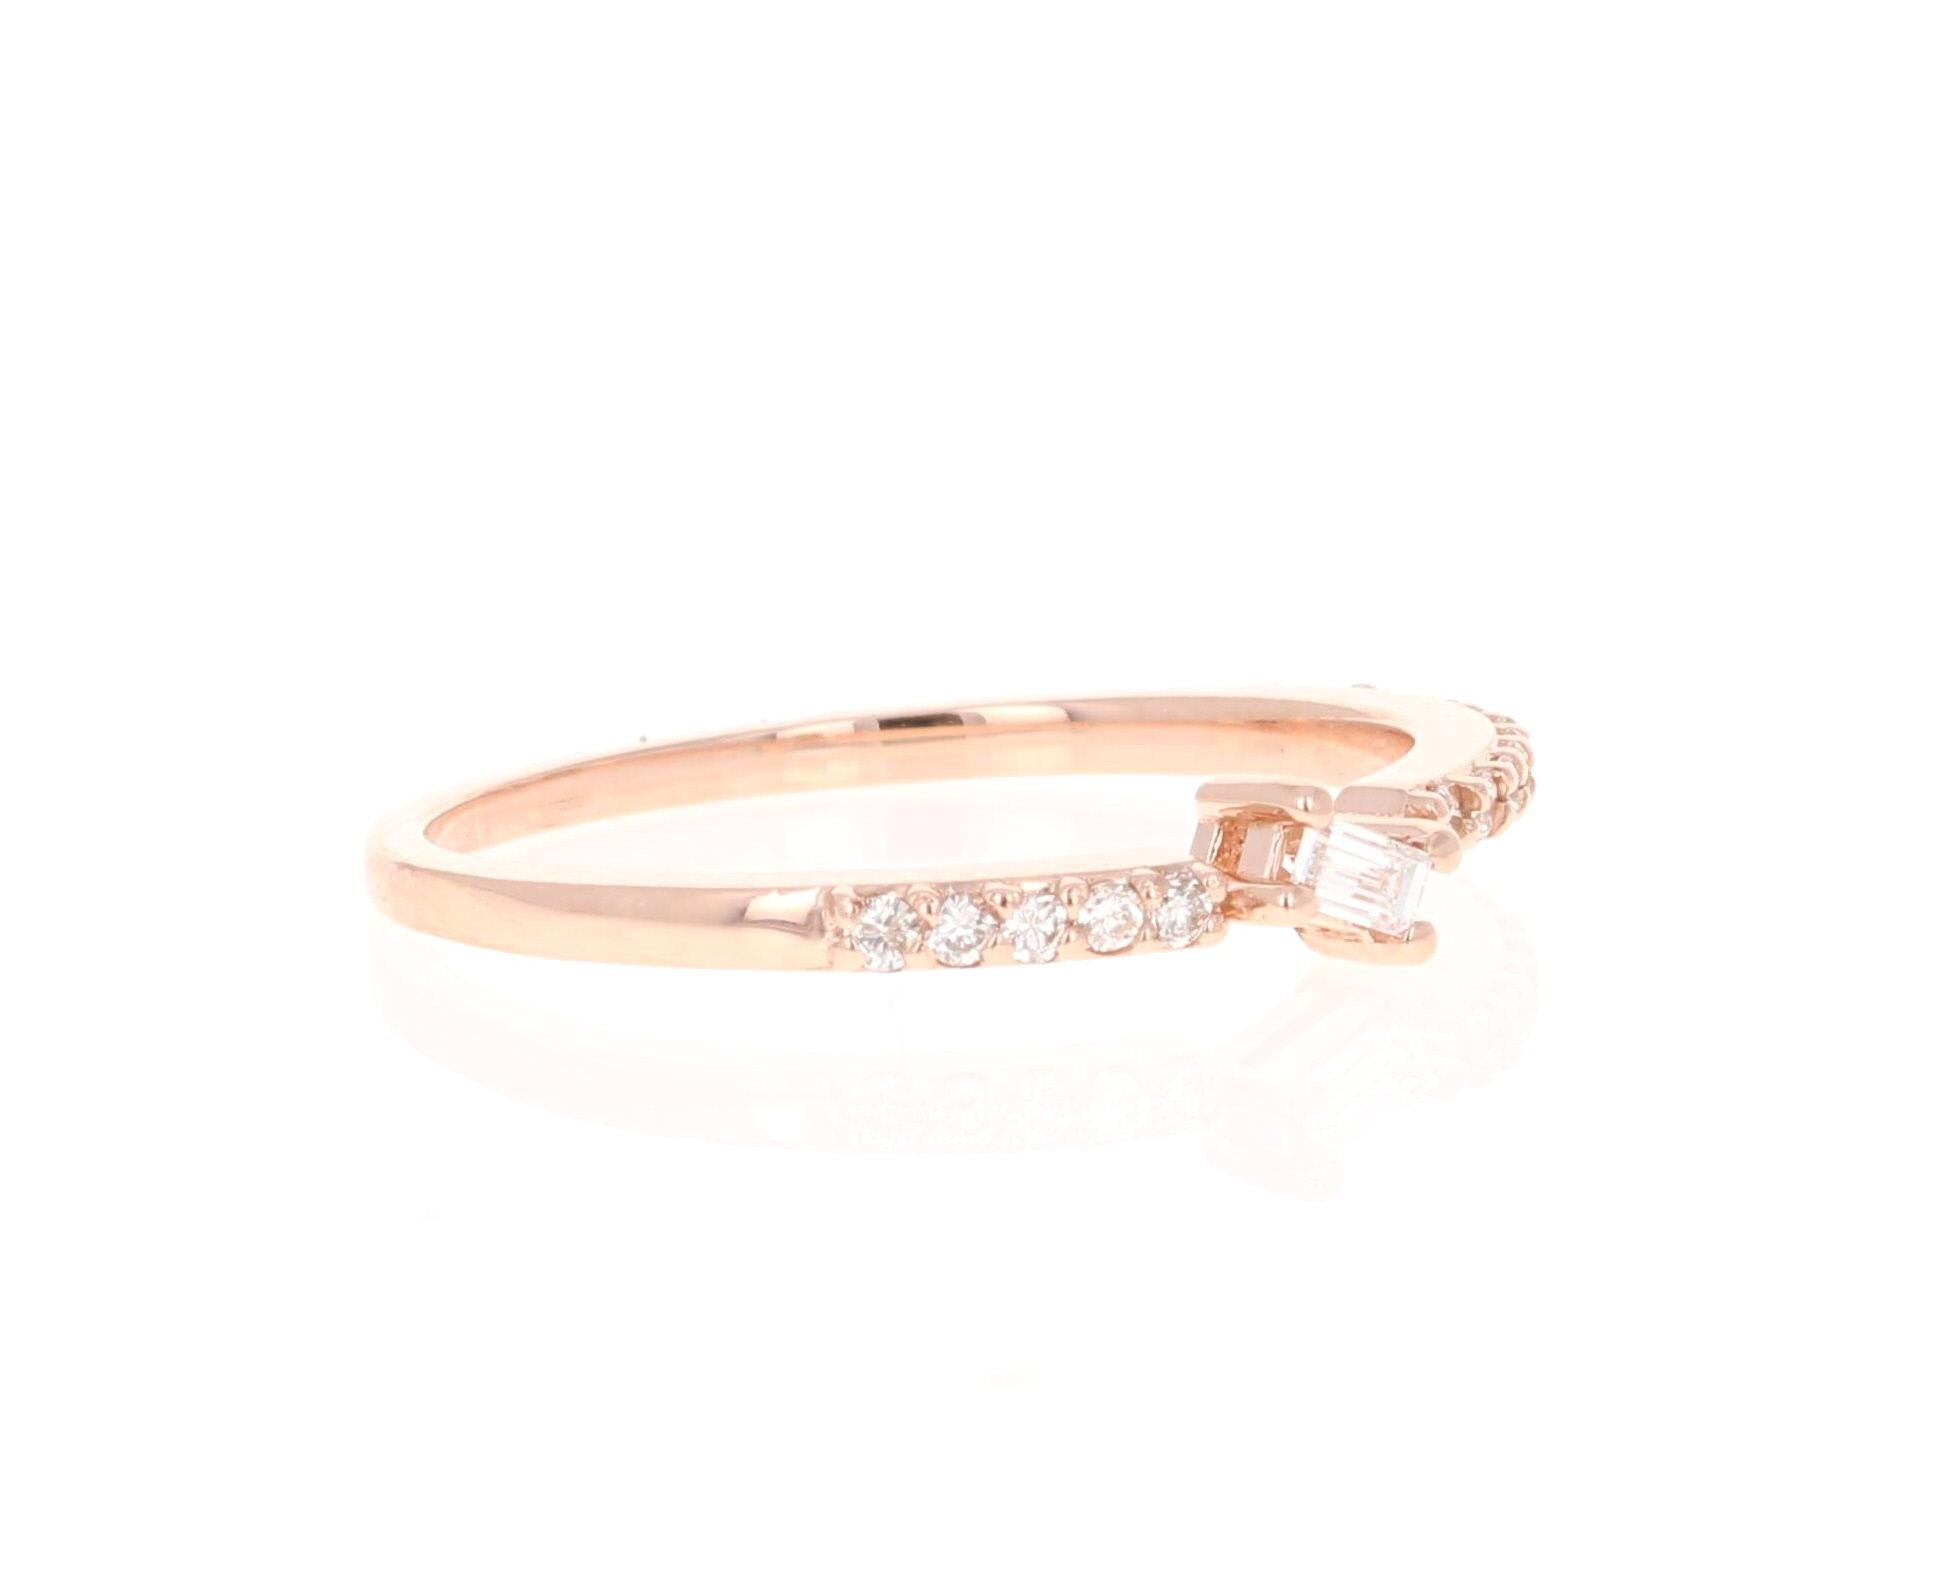 Unique and cute band that can be worn as a single band or stack with other bands in other colors of Gold! 

This ring has 1 Baguette Cut Diamond that weighs 0.07 Carats (Clarity: VS, Color: H) and is embellished with 16 Round Cut Diamonds that weigh